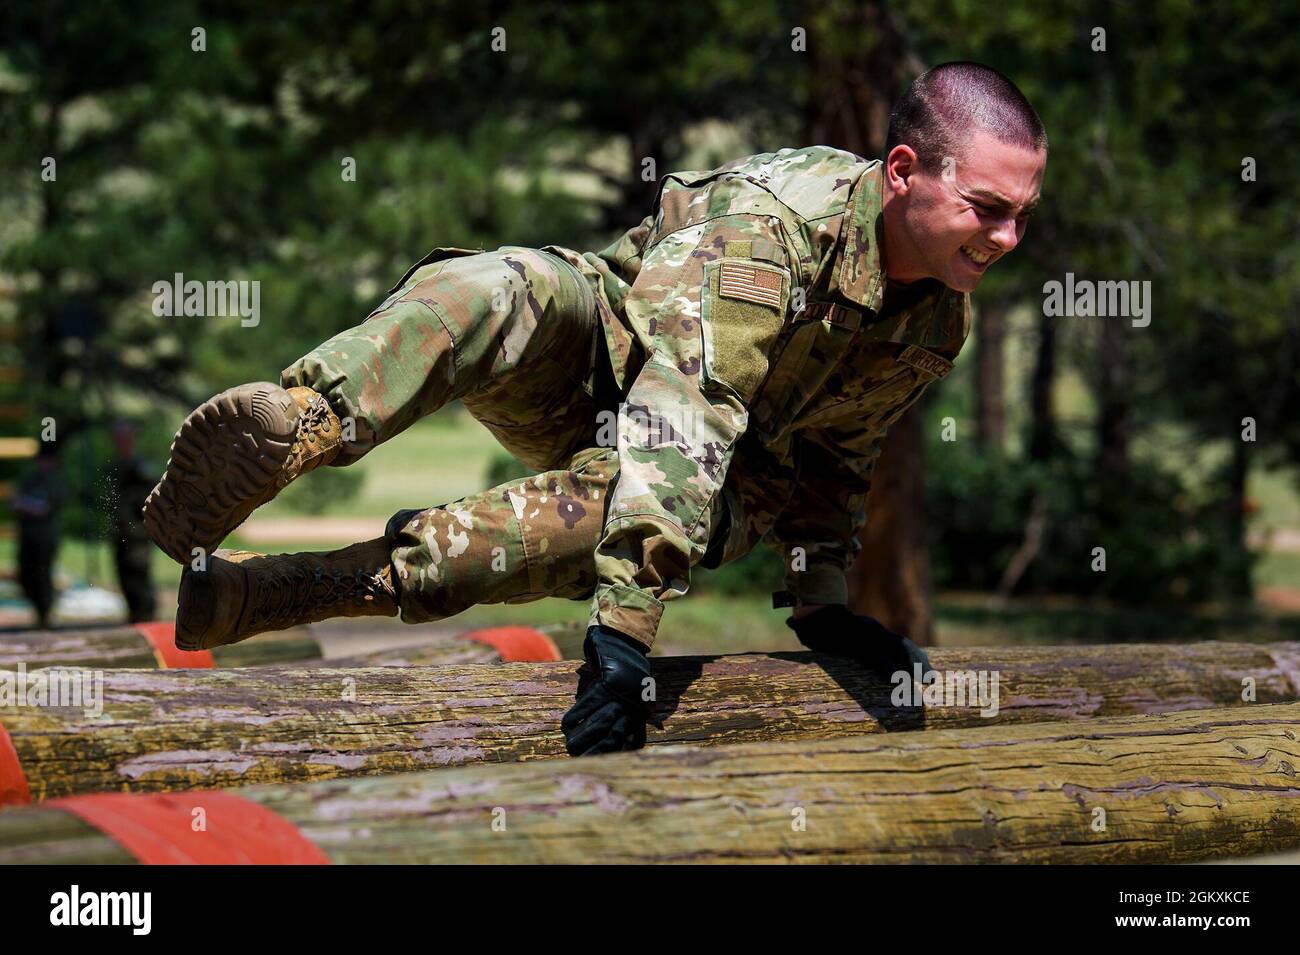 U.S. AIR FORCE ACADEMY, Colo. – A basic cadet from the Class of 2025 completes the confidence course at the U.S. Air Force Academy's Jacks Valley in Colorado Springs, Colo., on July 20, 2021. Basic Cadet Training (BCT) is a six-week indoctrination program to guide the transformation of new cadets from being civilians to military academy cadets prepared to enter a four-year officer commissioning program. Stock Photo